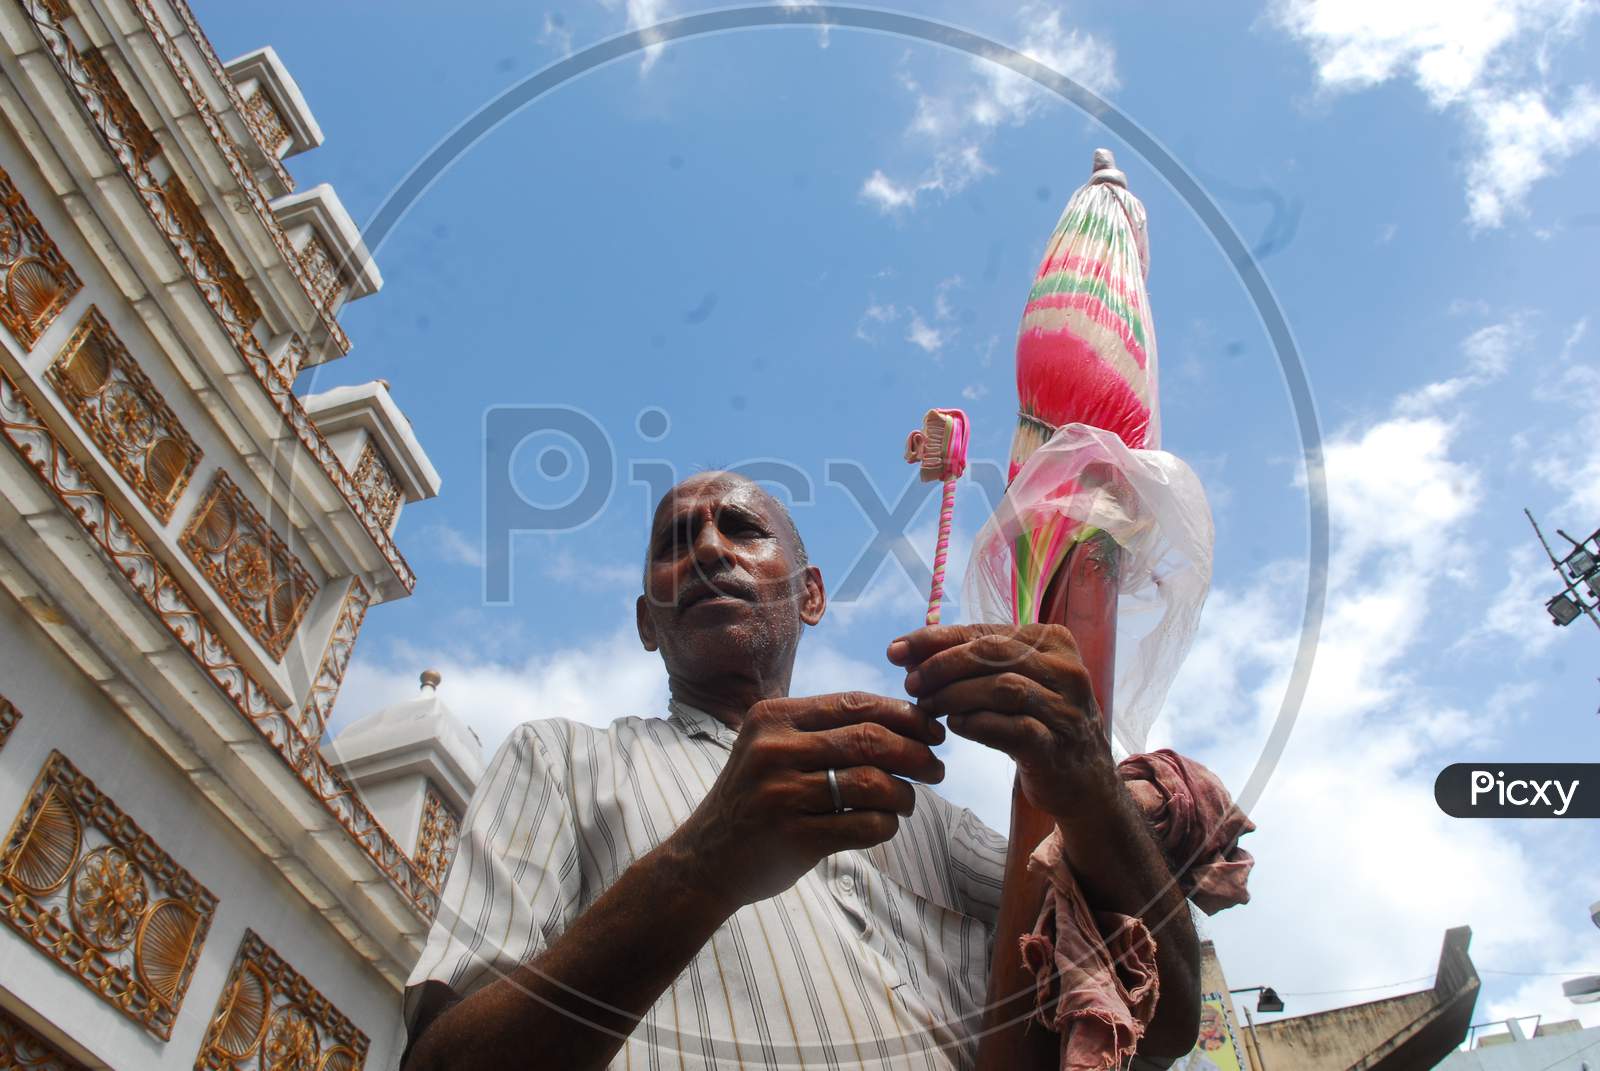 Indian Man making a toothbrush with candy